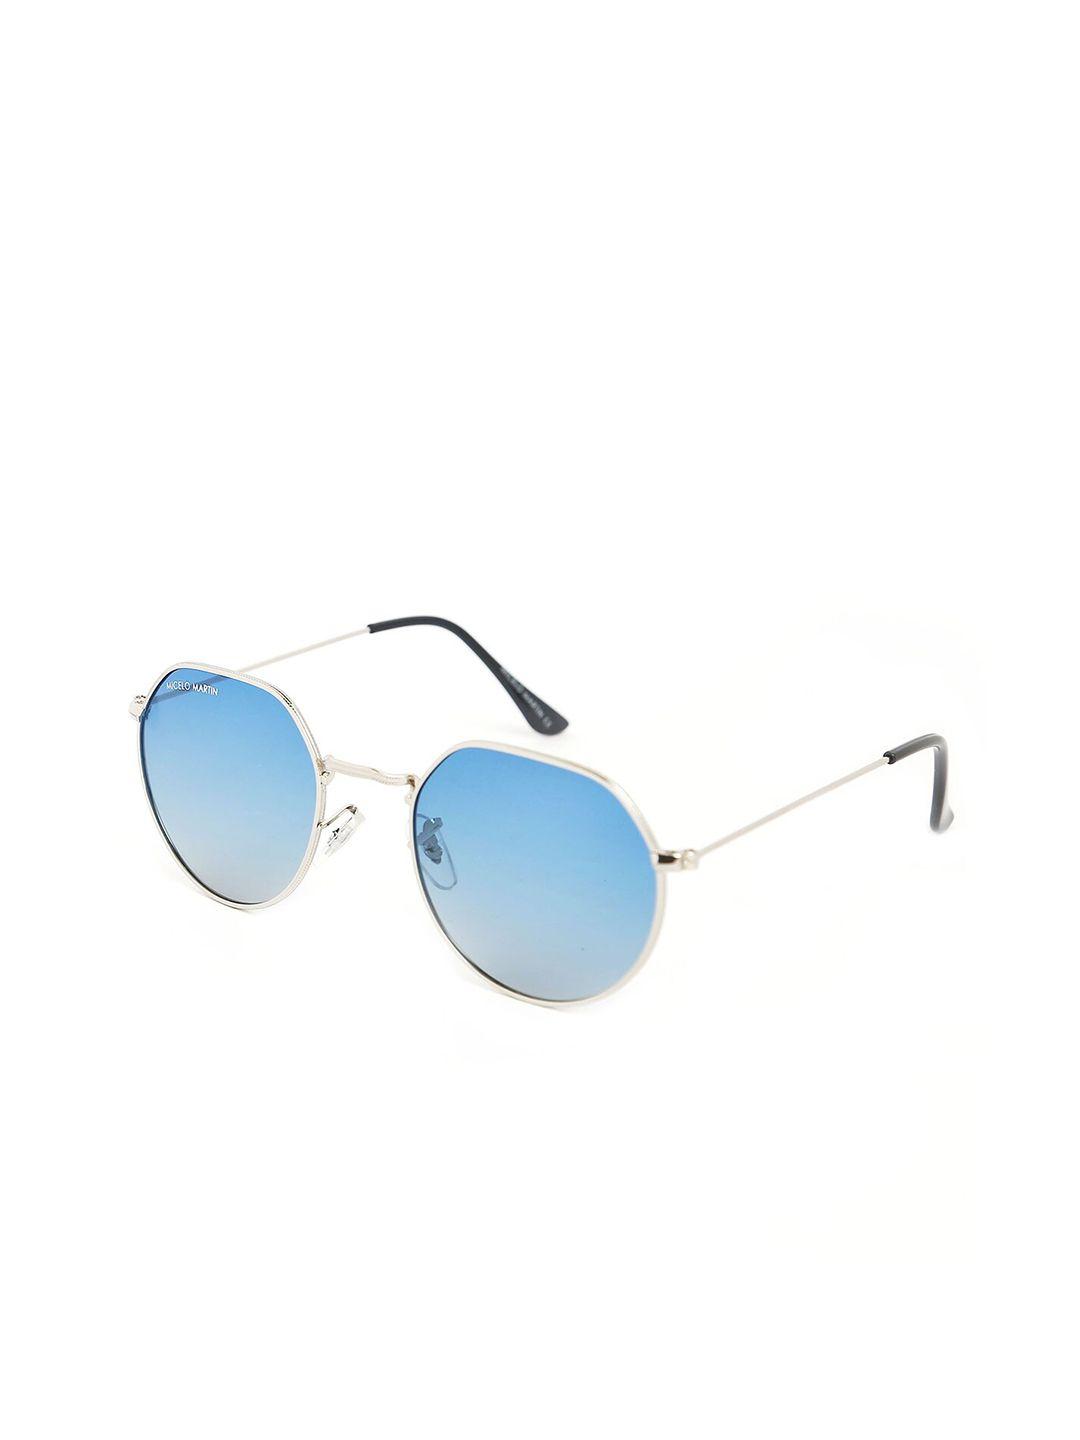 micelo martin unisex blue lens & silver-toned round sunglasses with uv protected lens